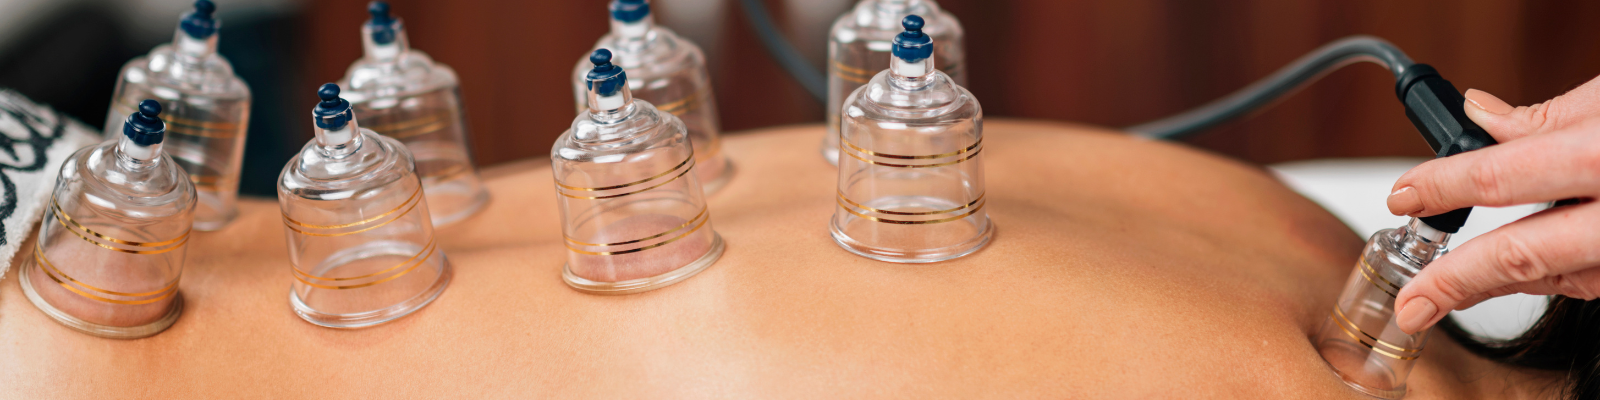 Cupping Therapy Treatment - Be Well Holistic Massage Wellness Center, P.A.